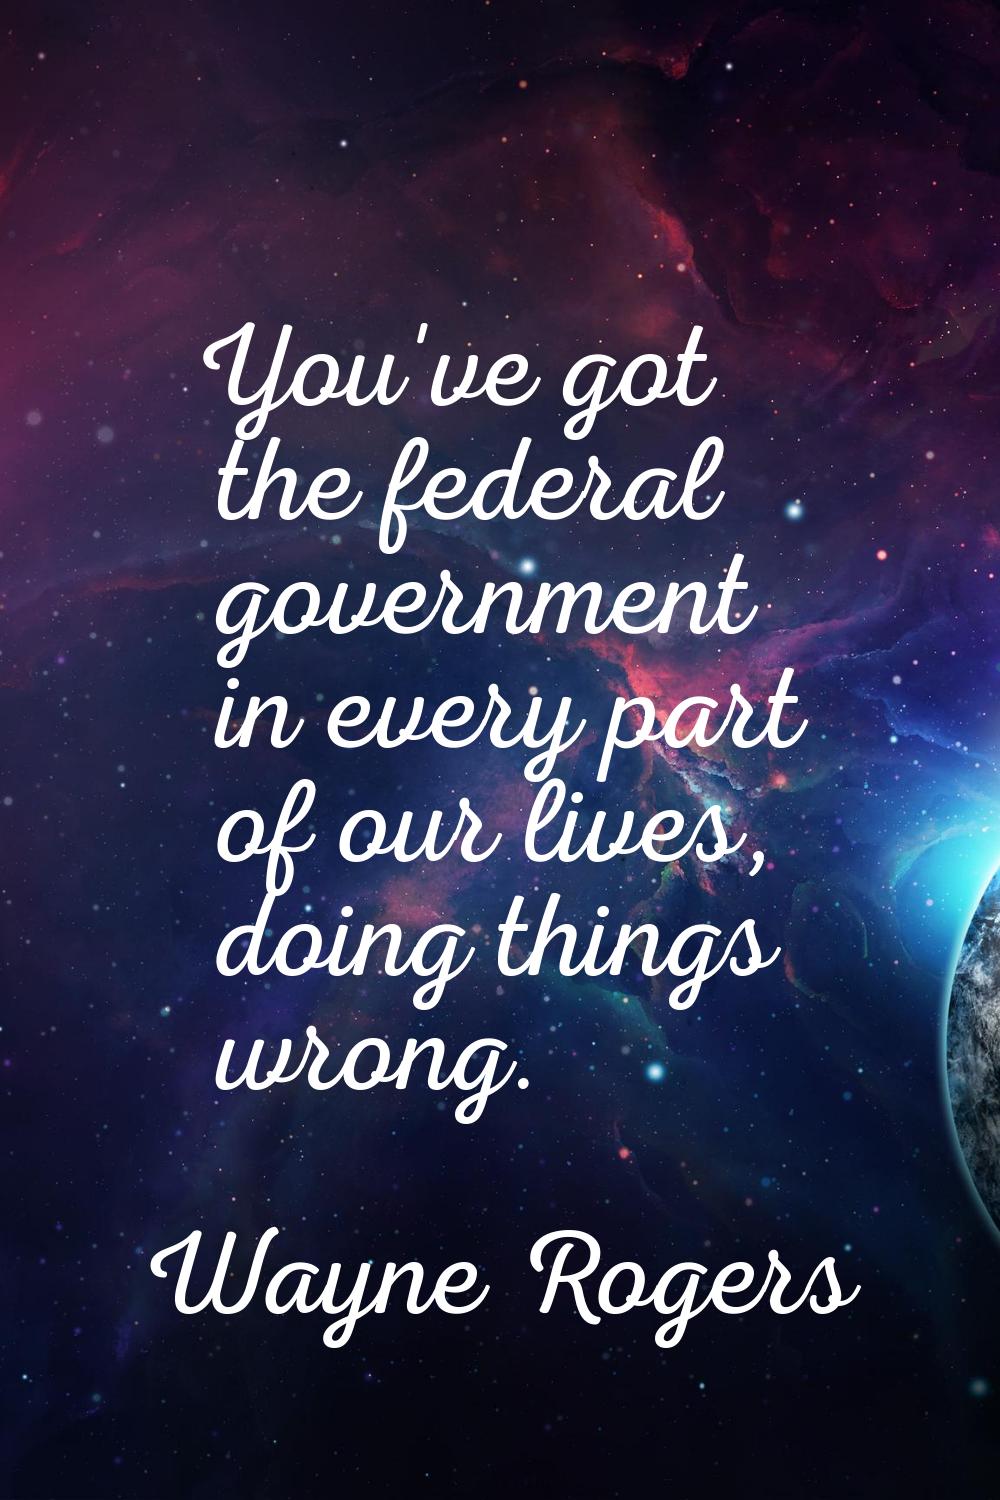 You've got the federal government in every part of our lives, doing things wrong.